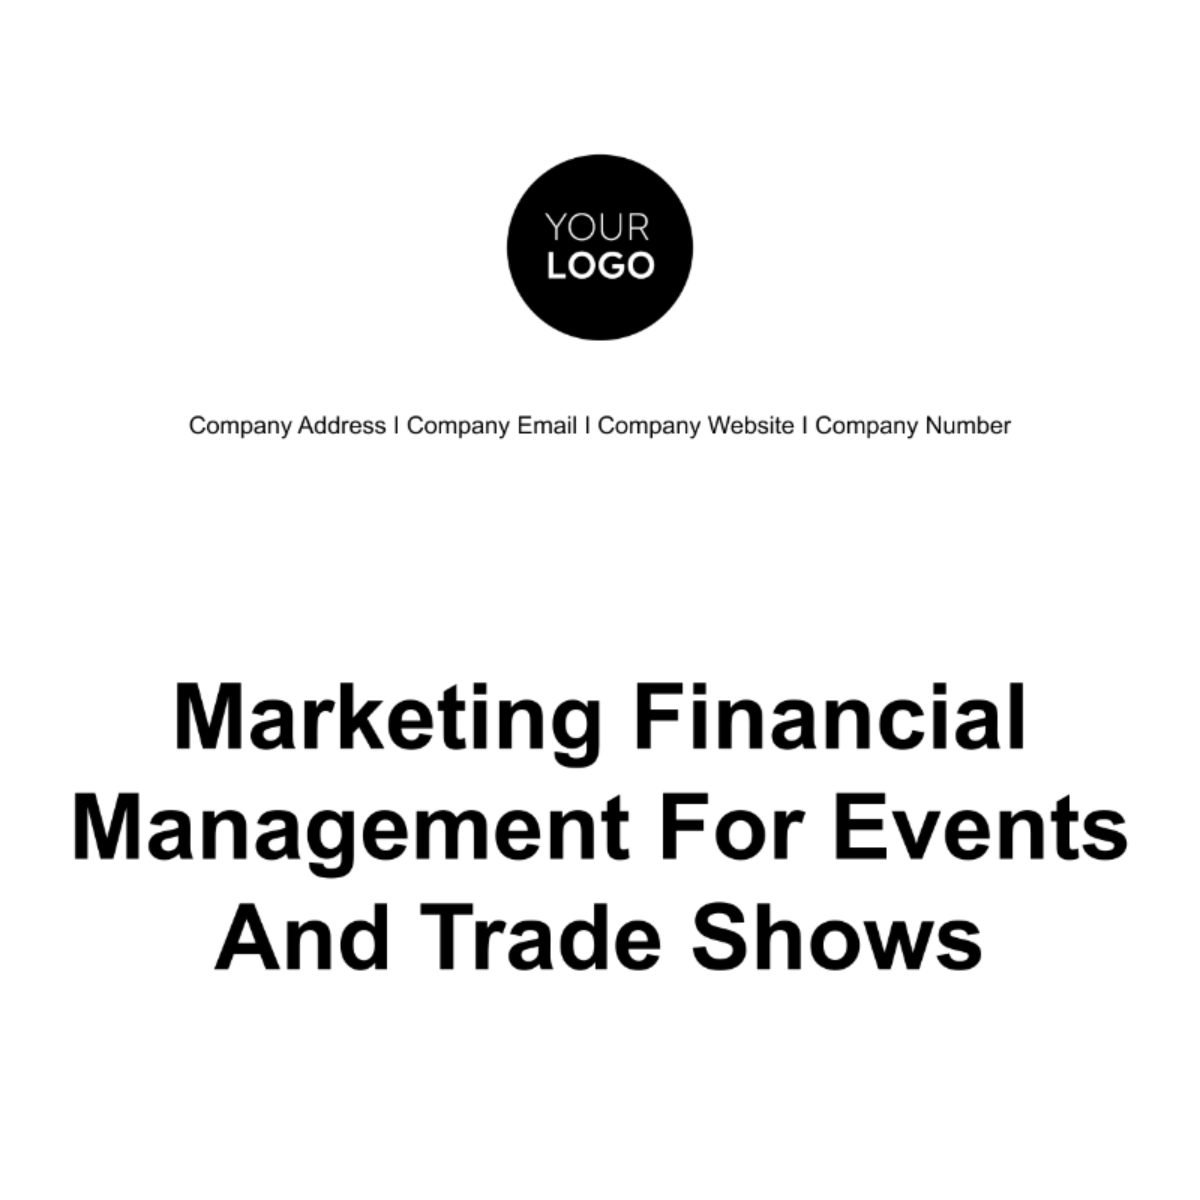 Marketing Financial Management for Events and Trade Shows Template